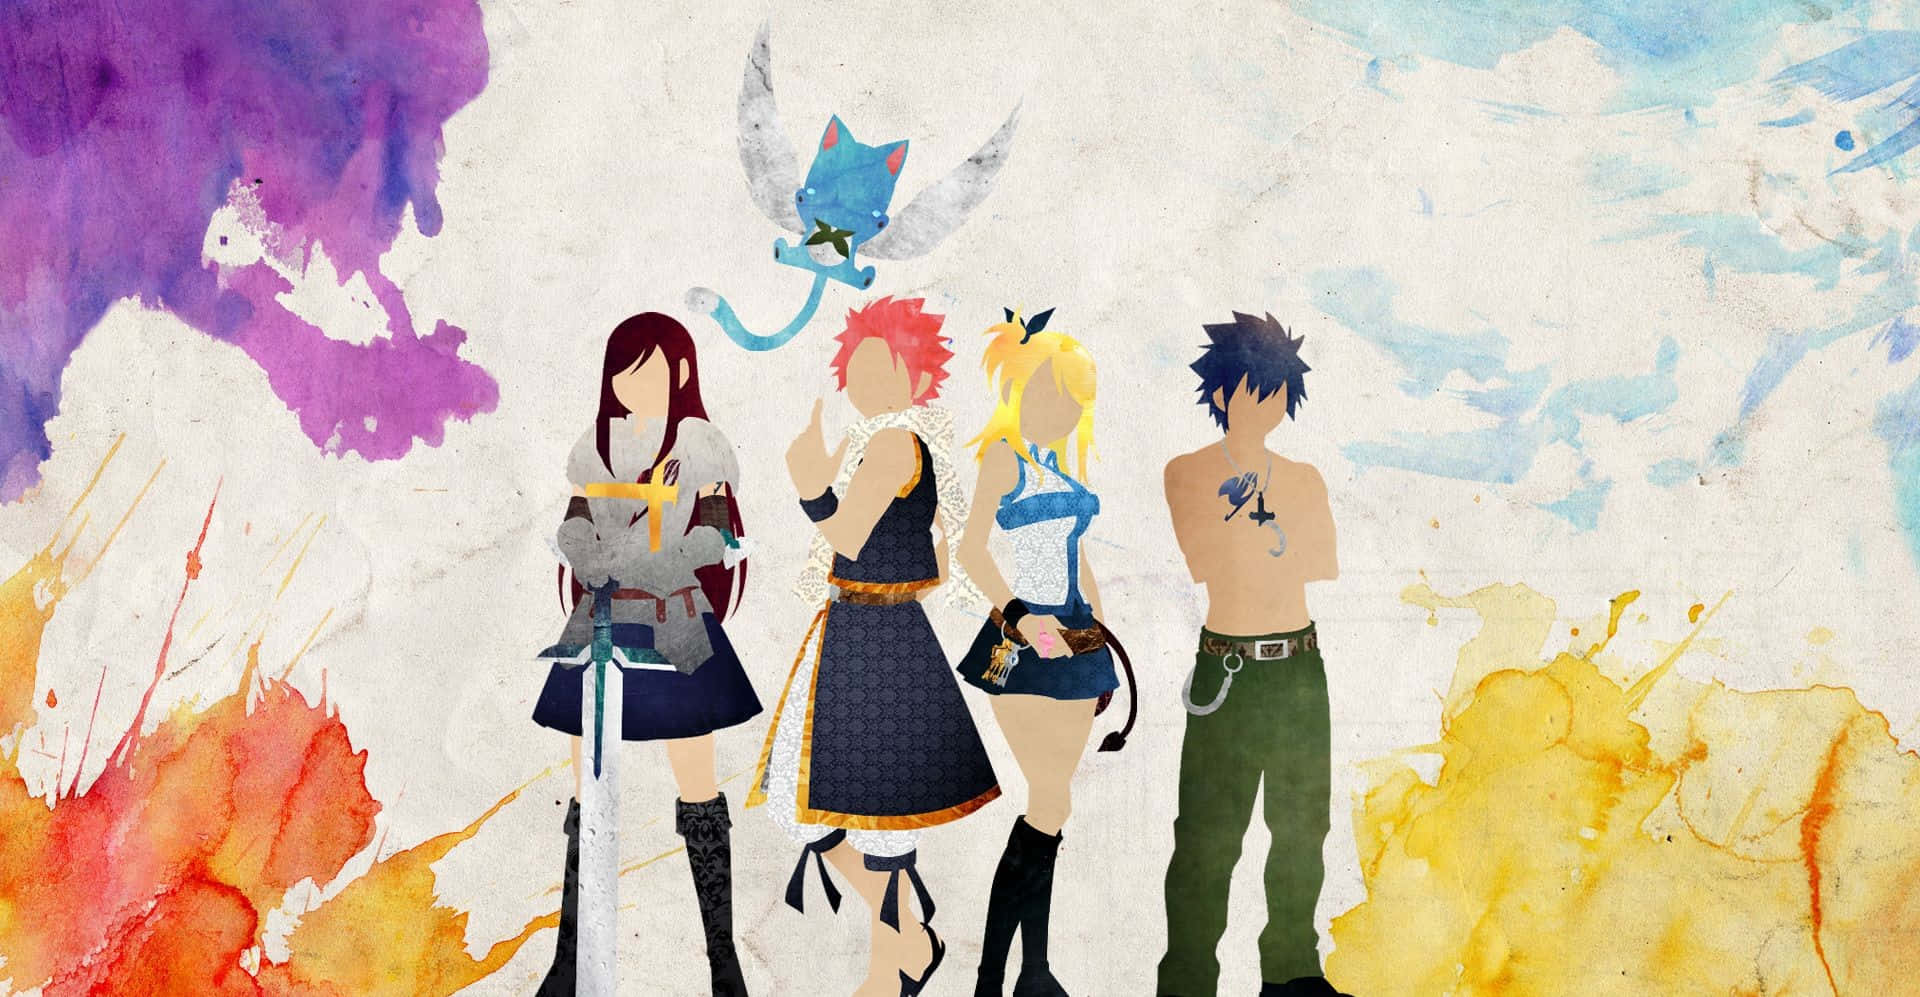 "Fairy Tail Is The Place To Be!"